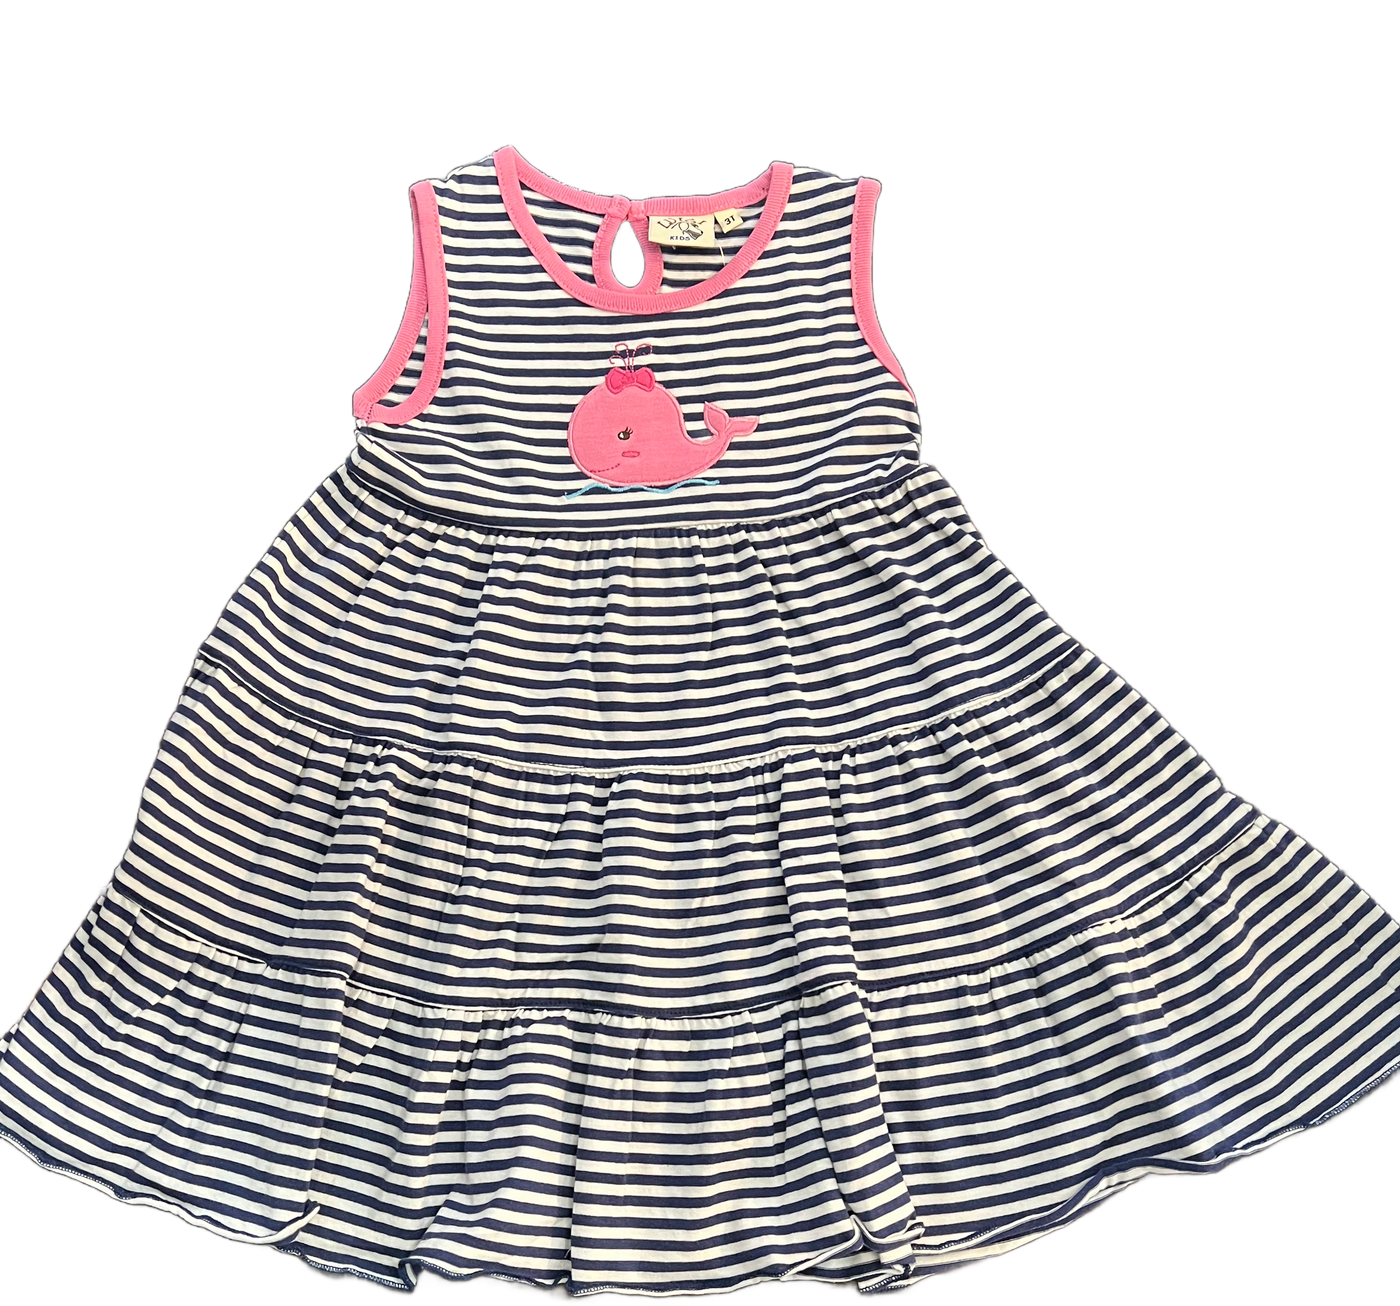 Royal/White Striped Tiered Dress w/ Whale